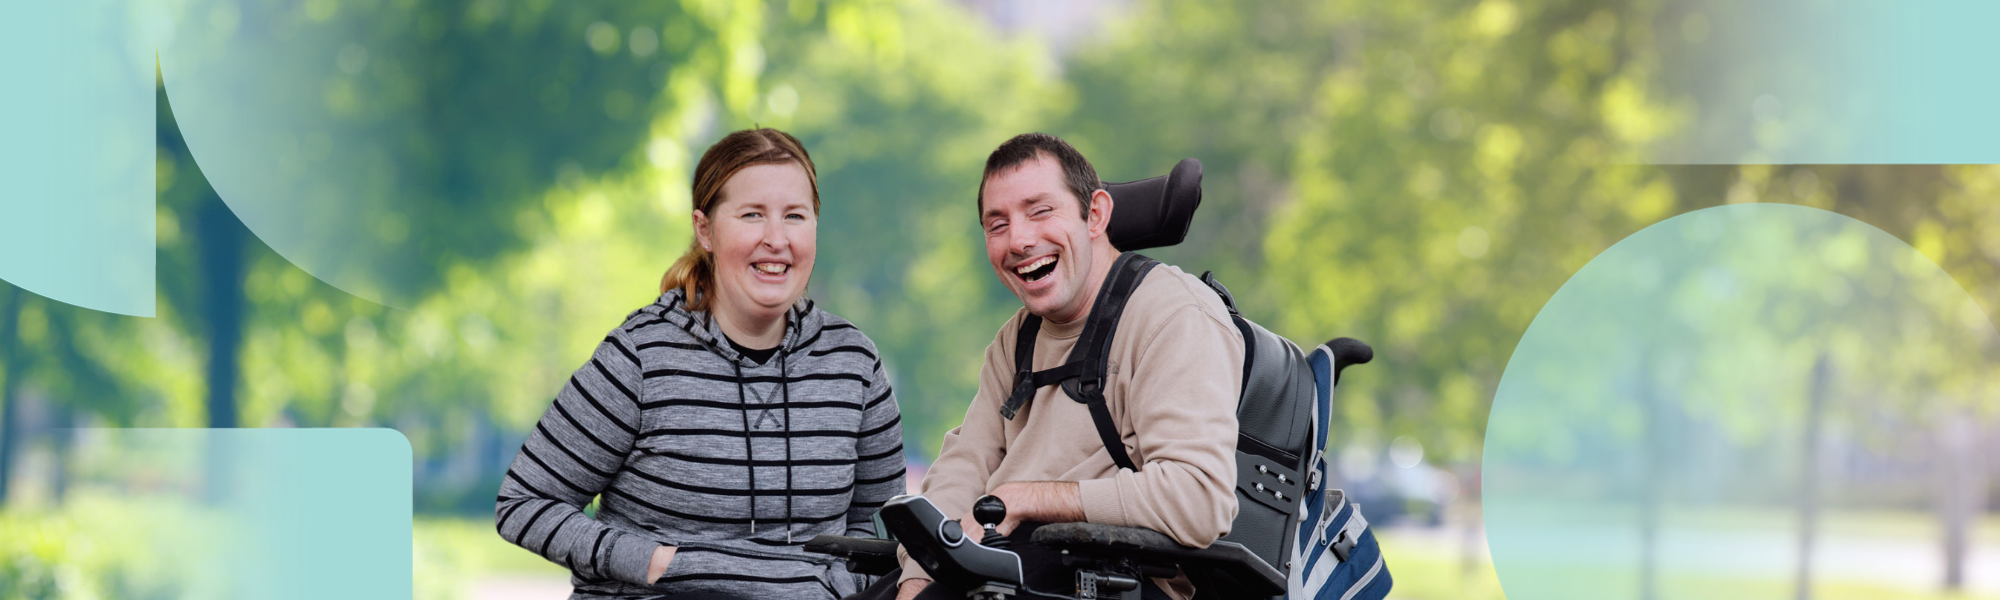 IMAGE: Image of client and Disability support worker in the park - they are talking and smiling